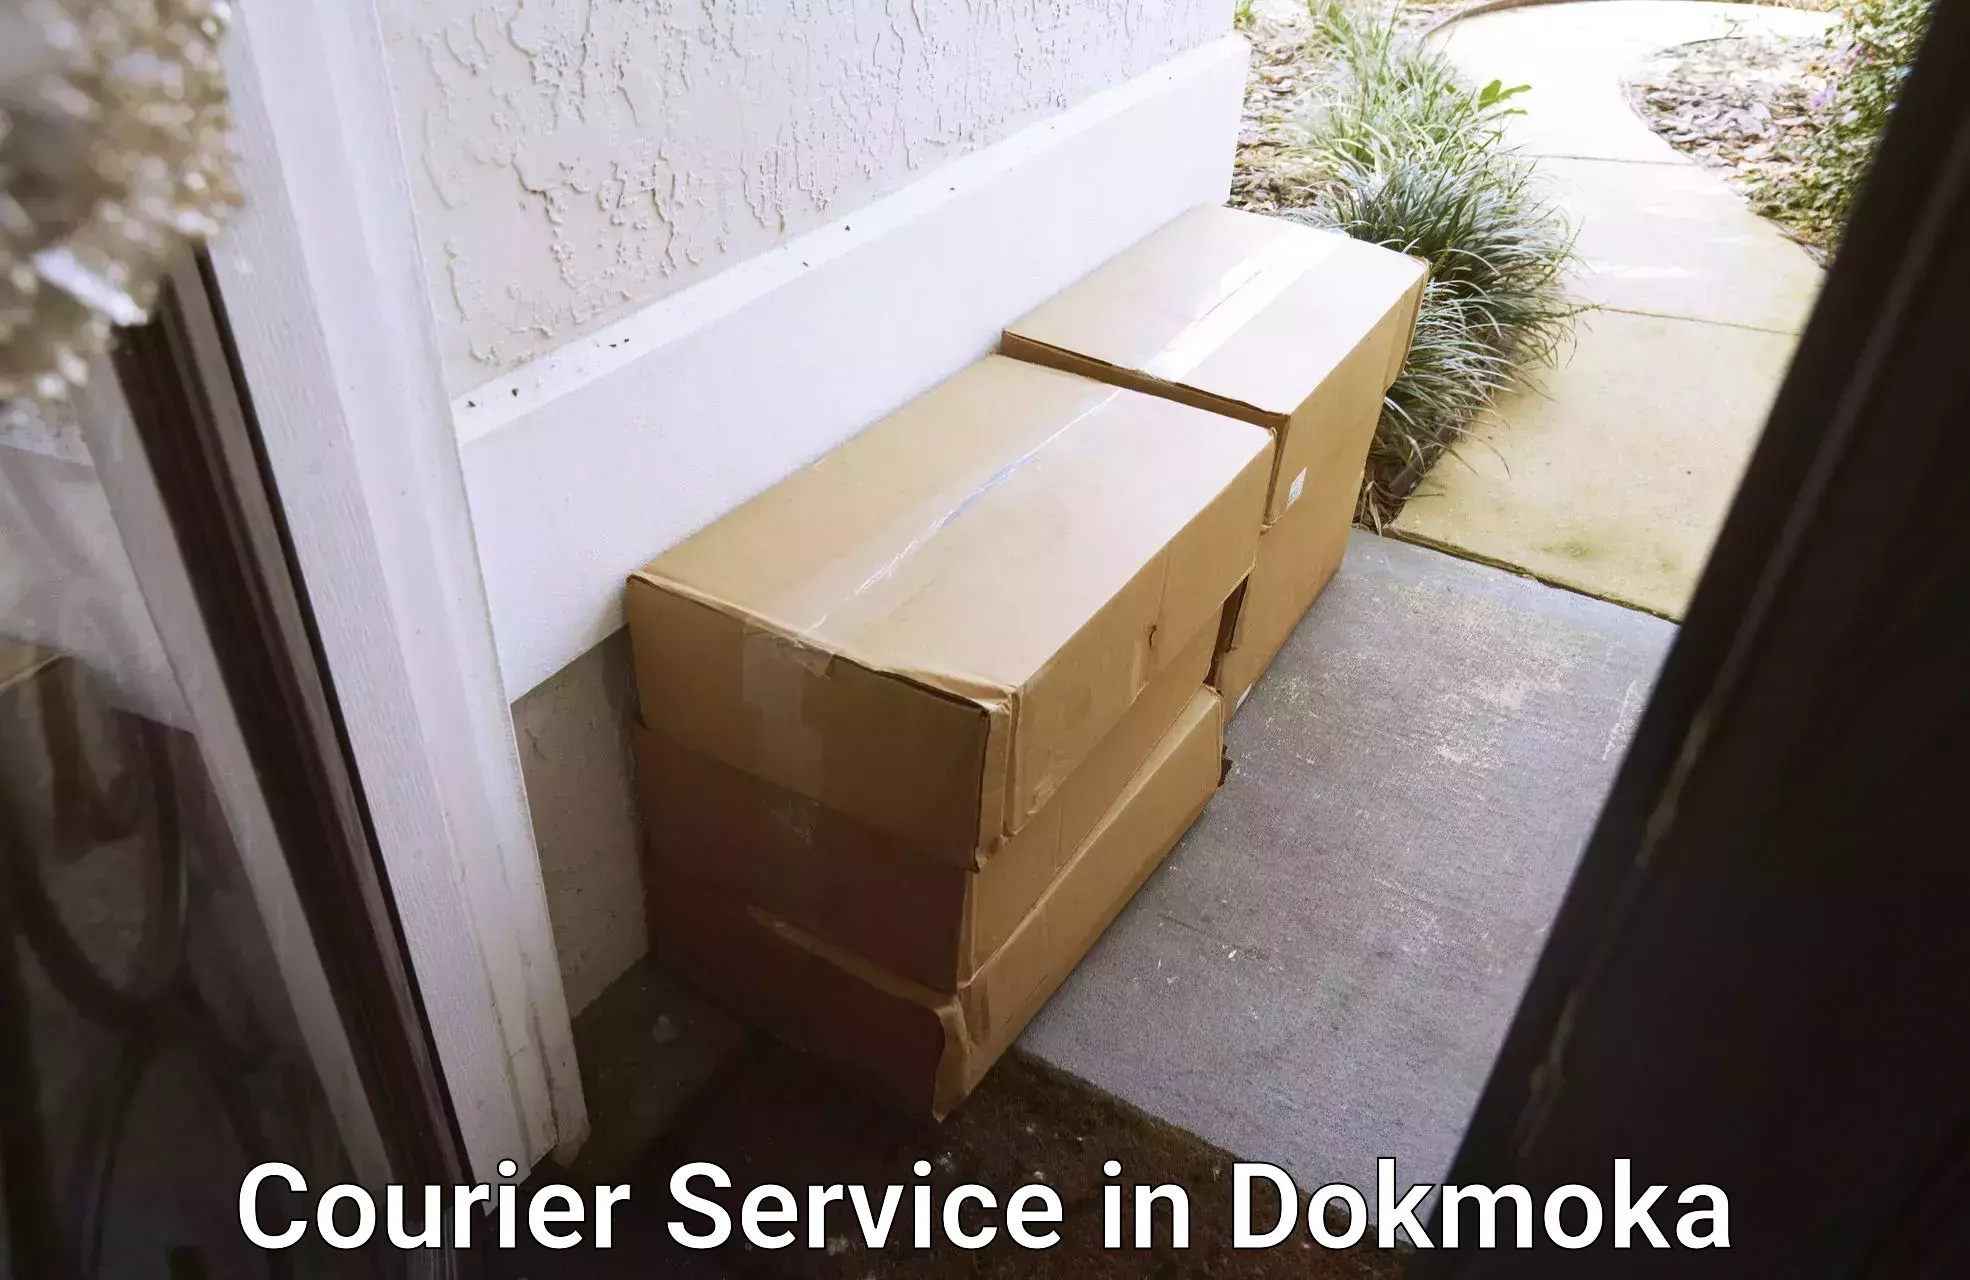 Short distance delivery in Dokmoka